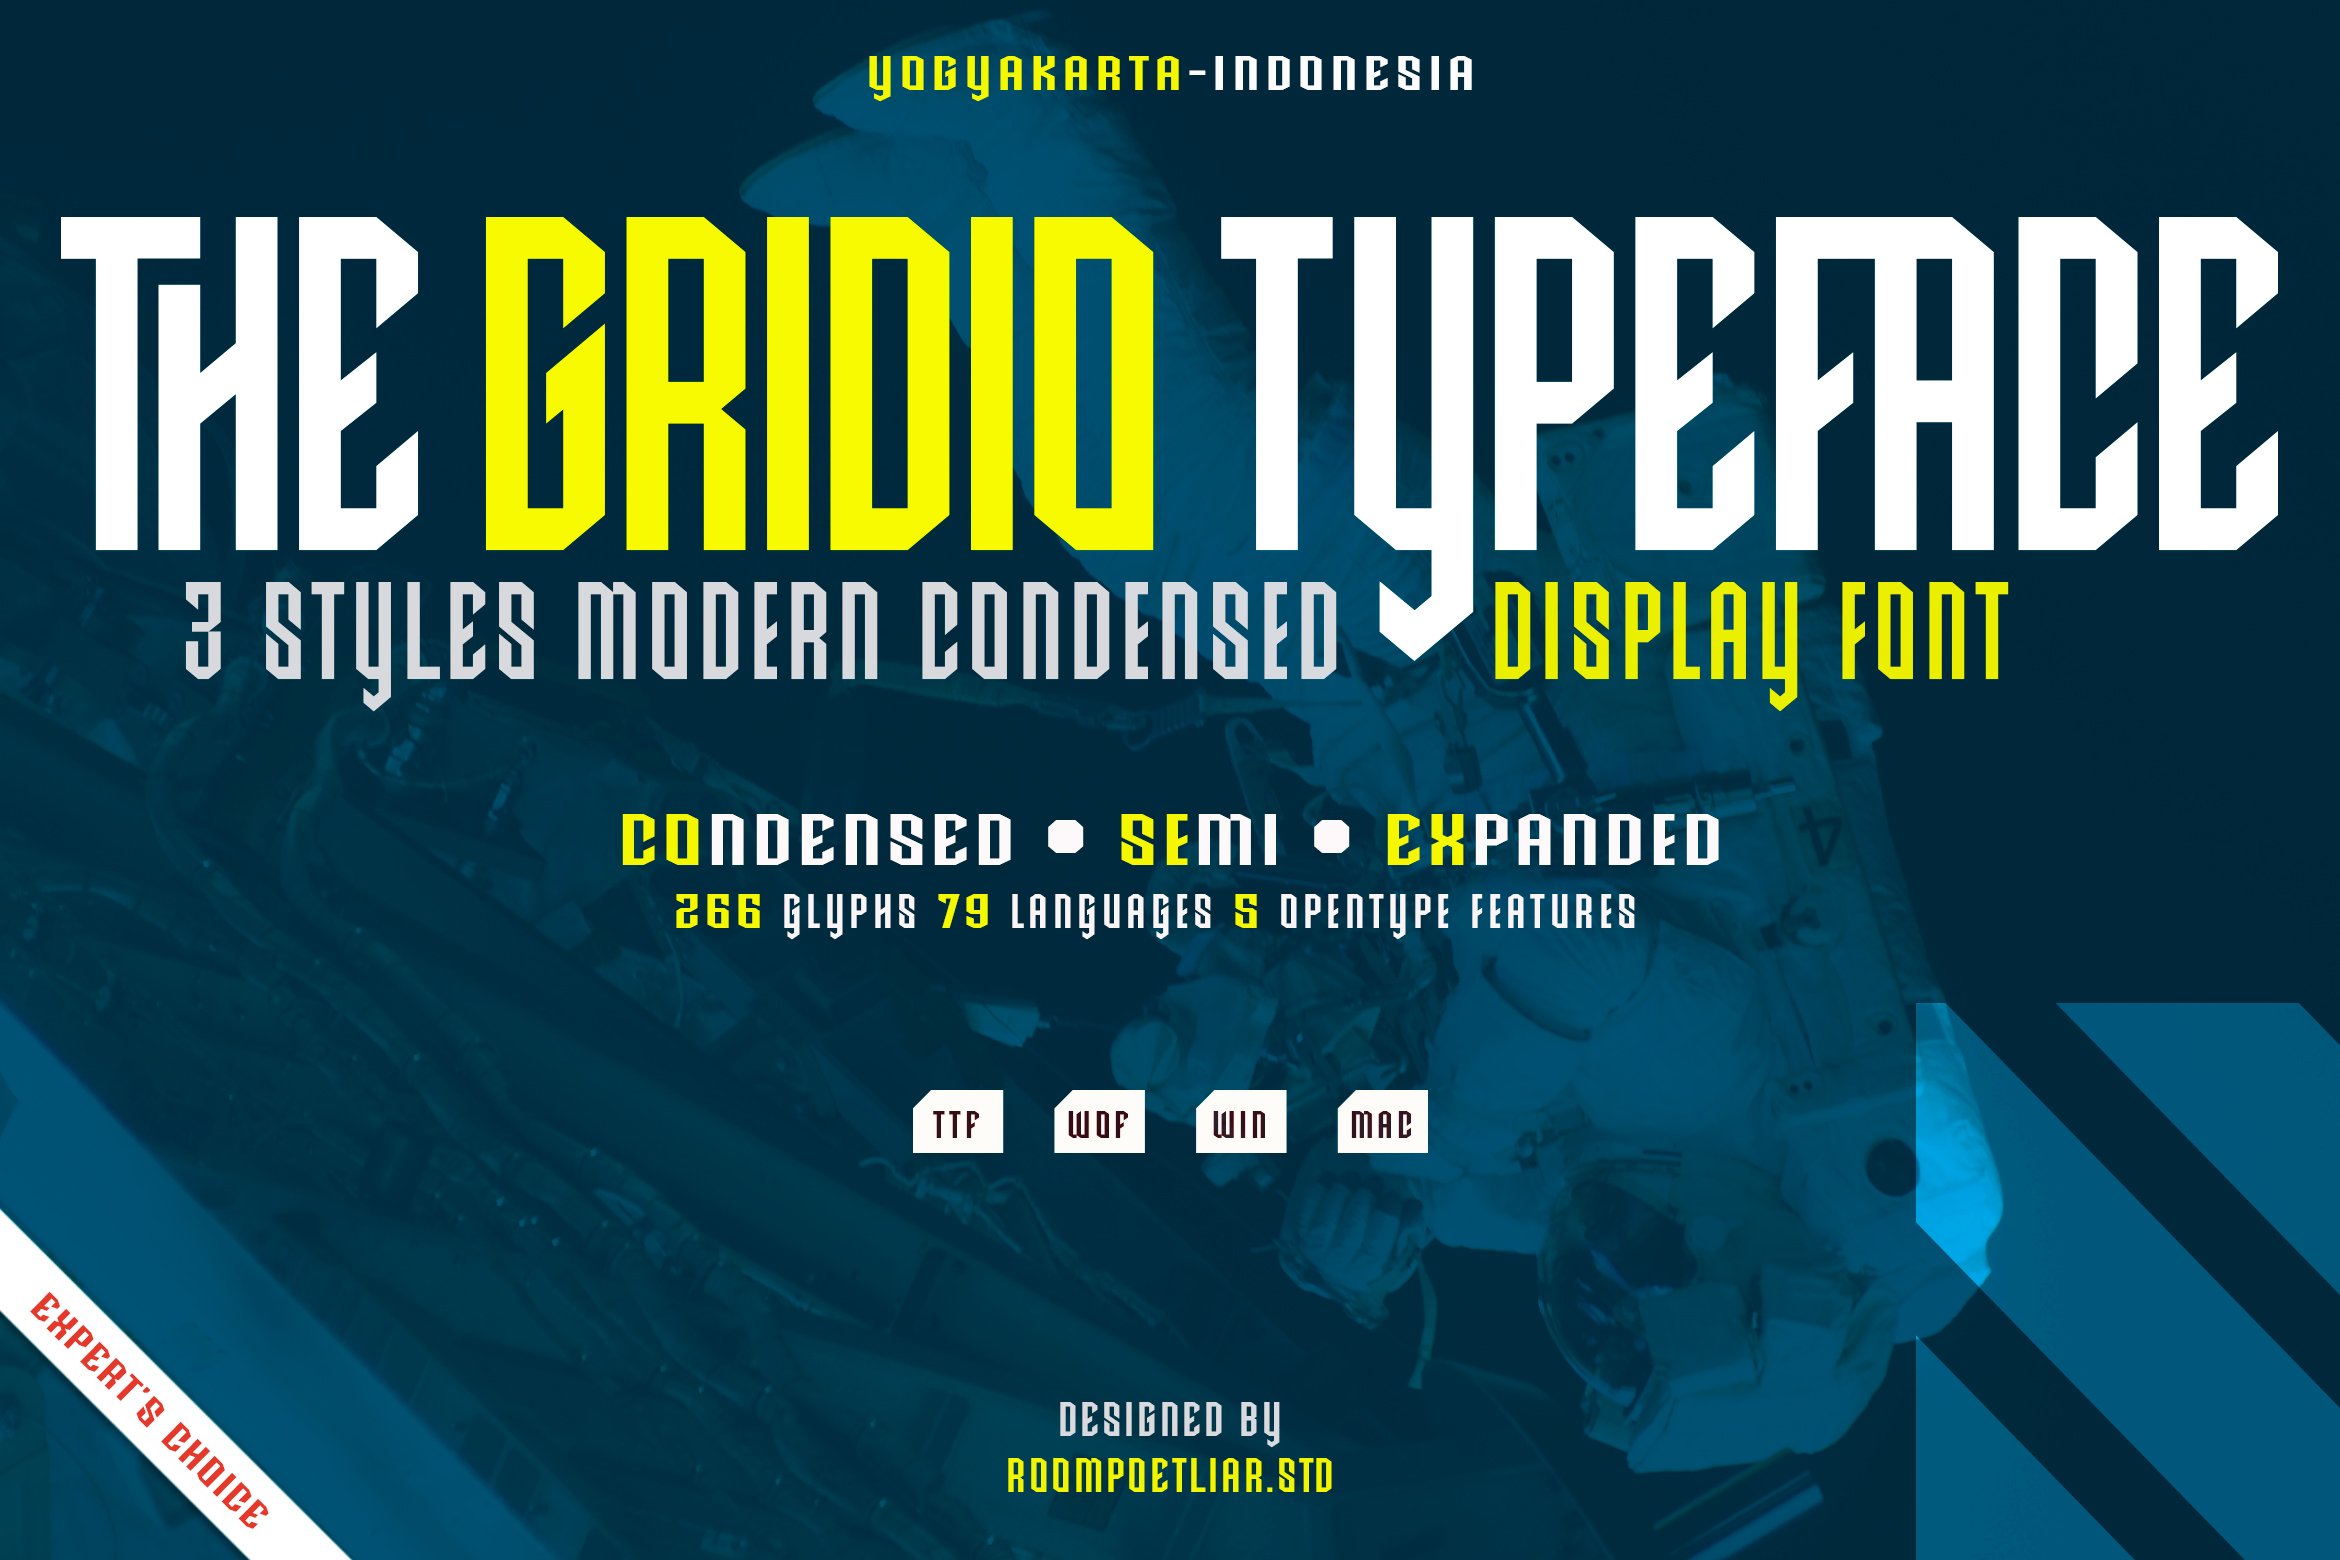 Gridio Font Display cover image.